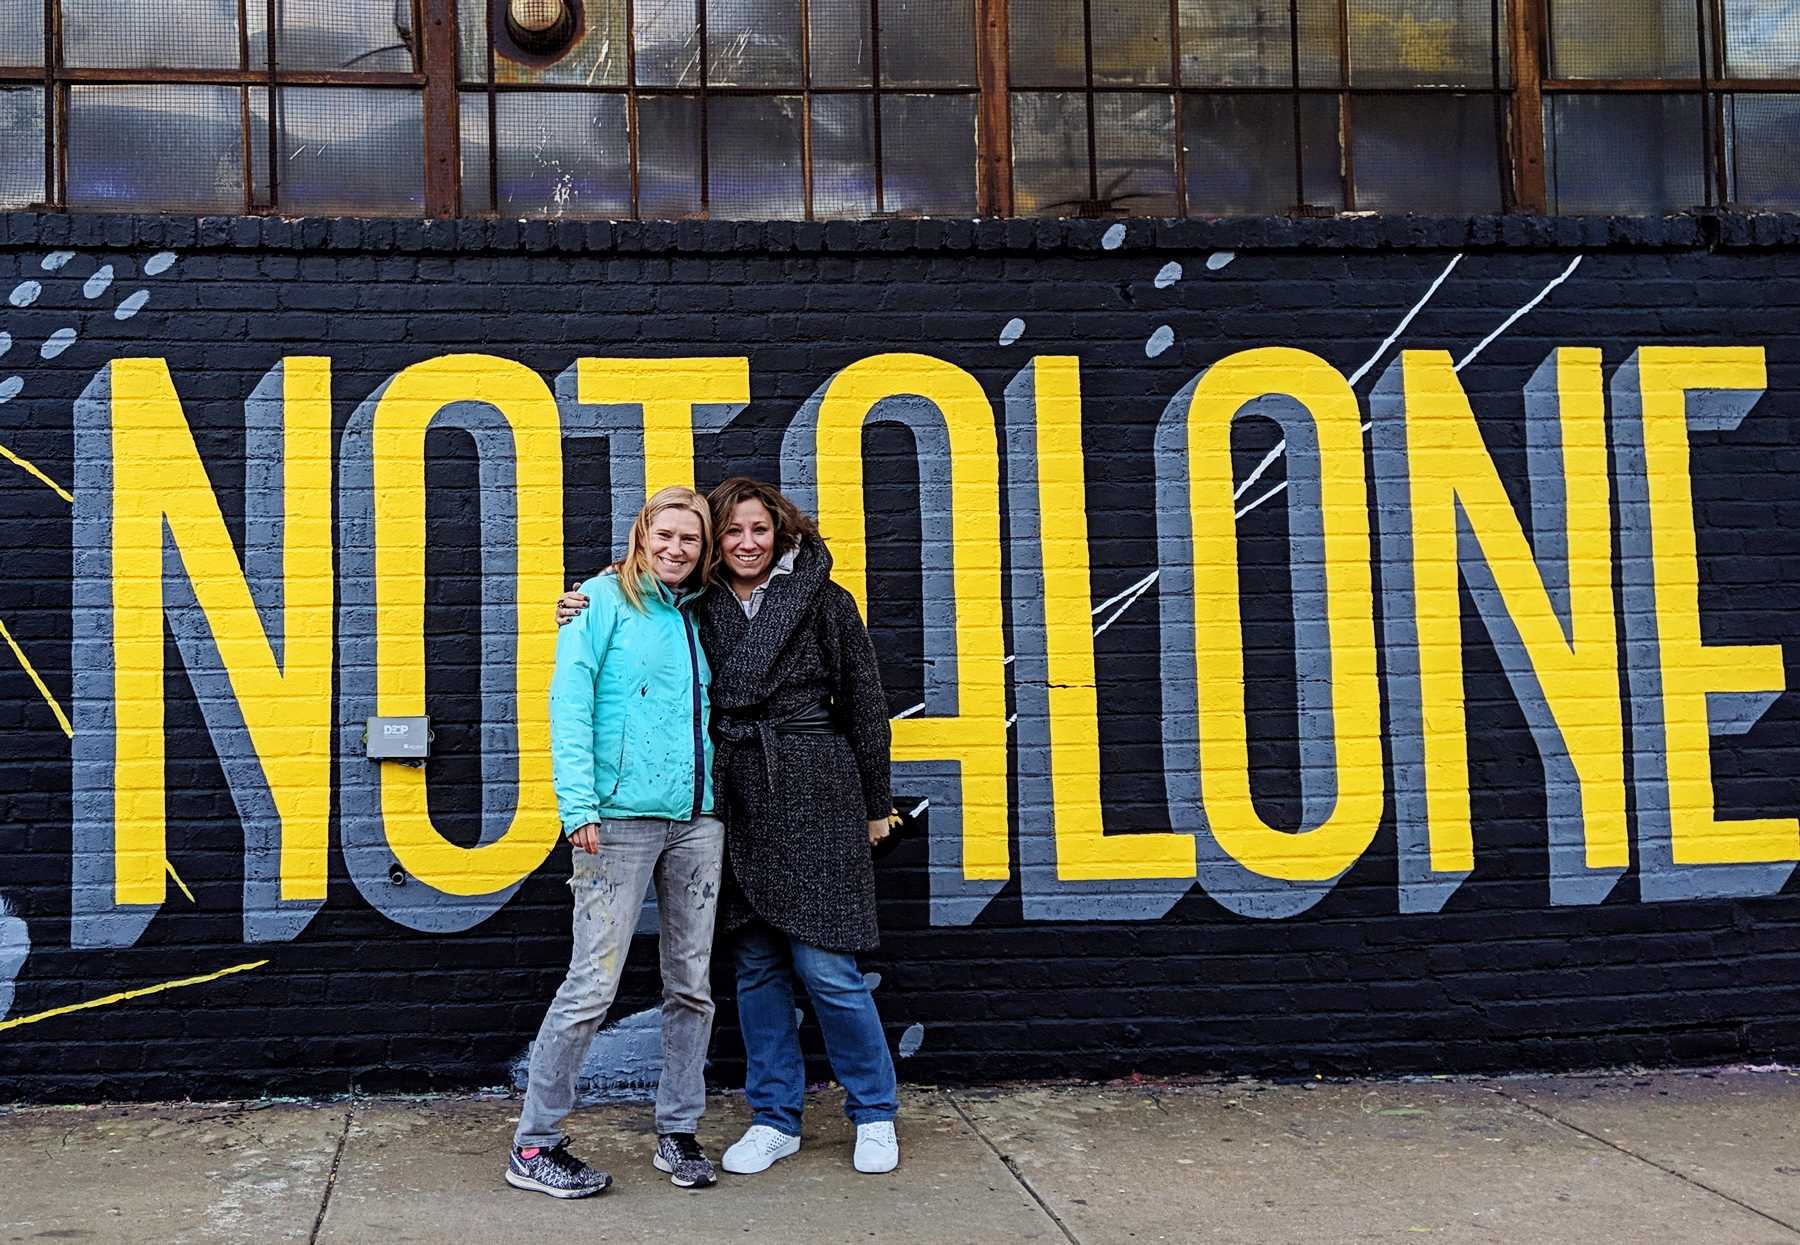 Annica Lydenberg (left) and Samantha Schutz, who came up with the idea for the series of “You Are Not Alone” murals to mark Mental Health Awareness Month, are looking for more buildings to paint on. Photo by Jackson Cook